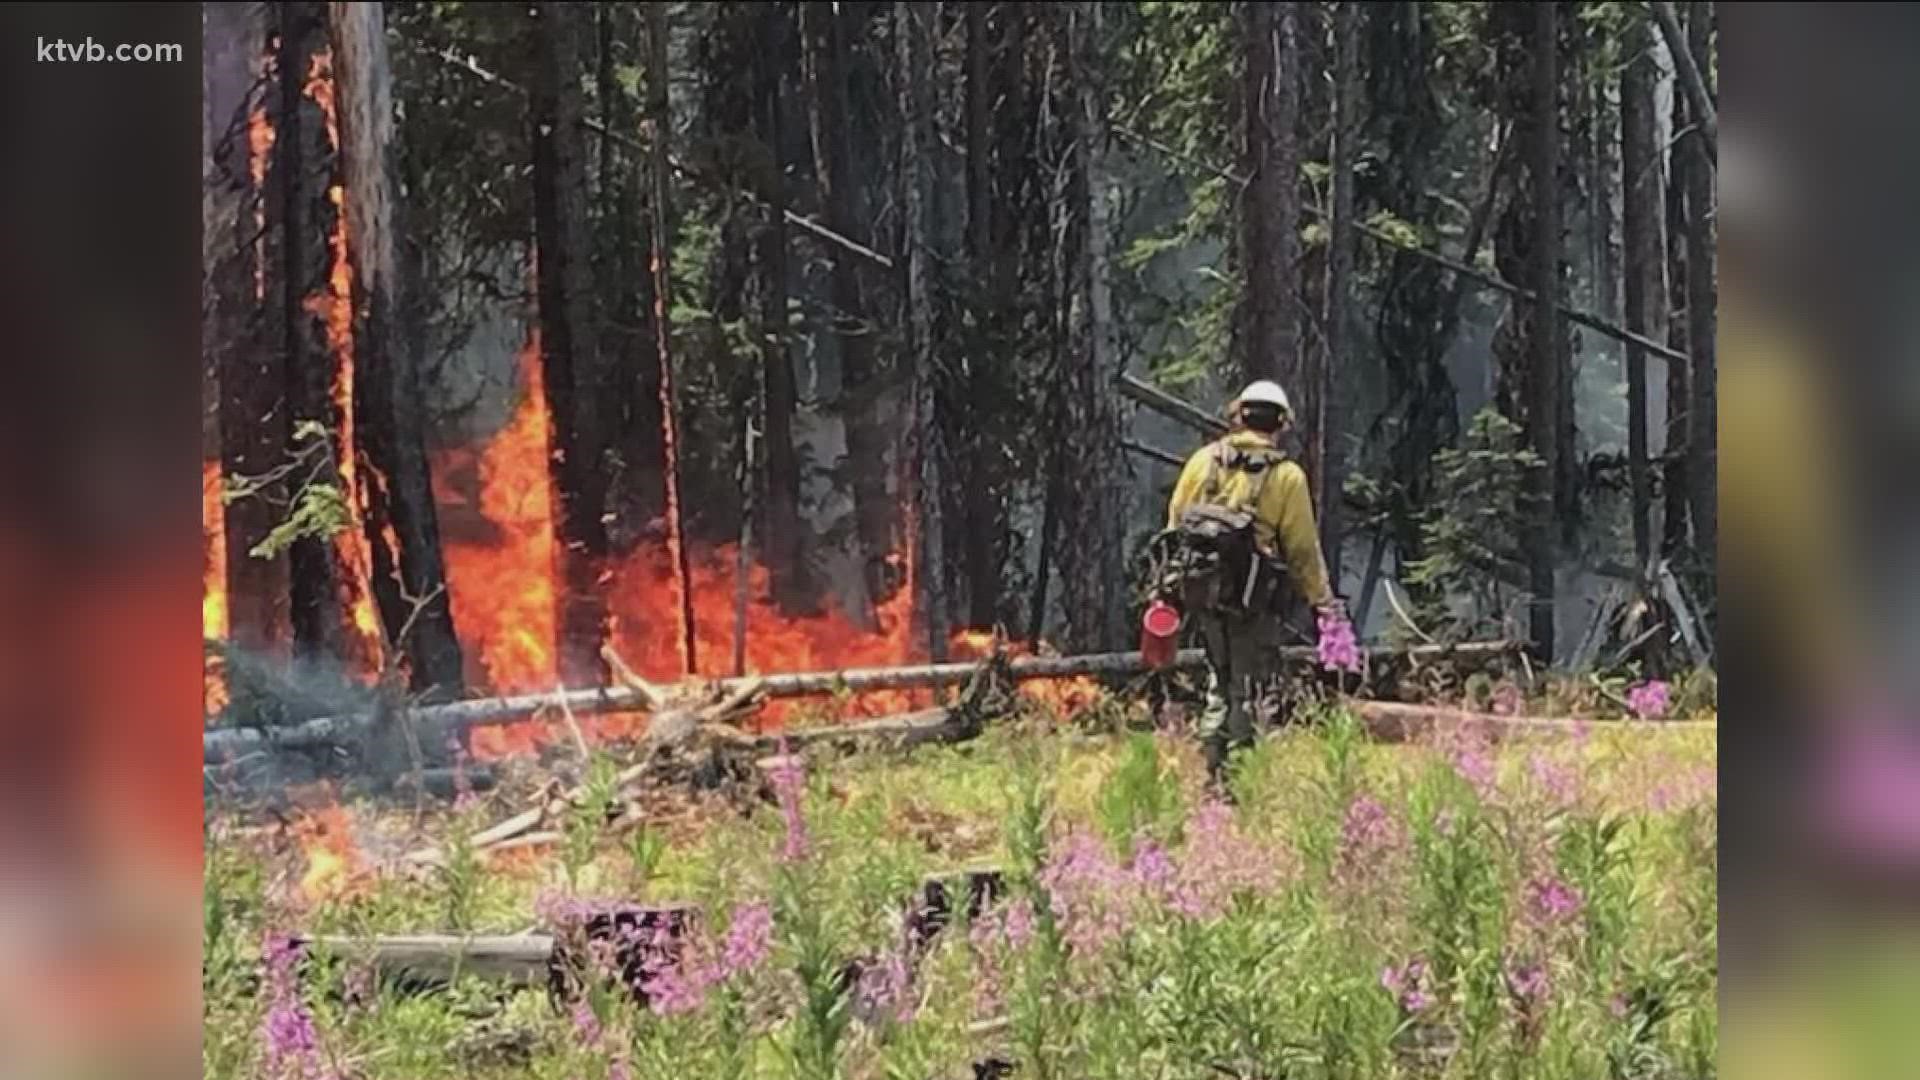 The U.S Forest Service says in order to put out Idaho fires like the Dixie Fire and the Deer Fire, long-duration periods of rain are needed, not short bursts.